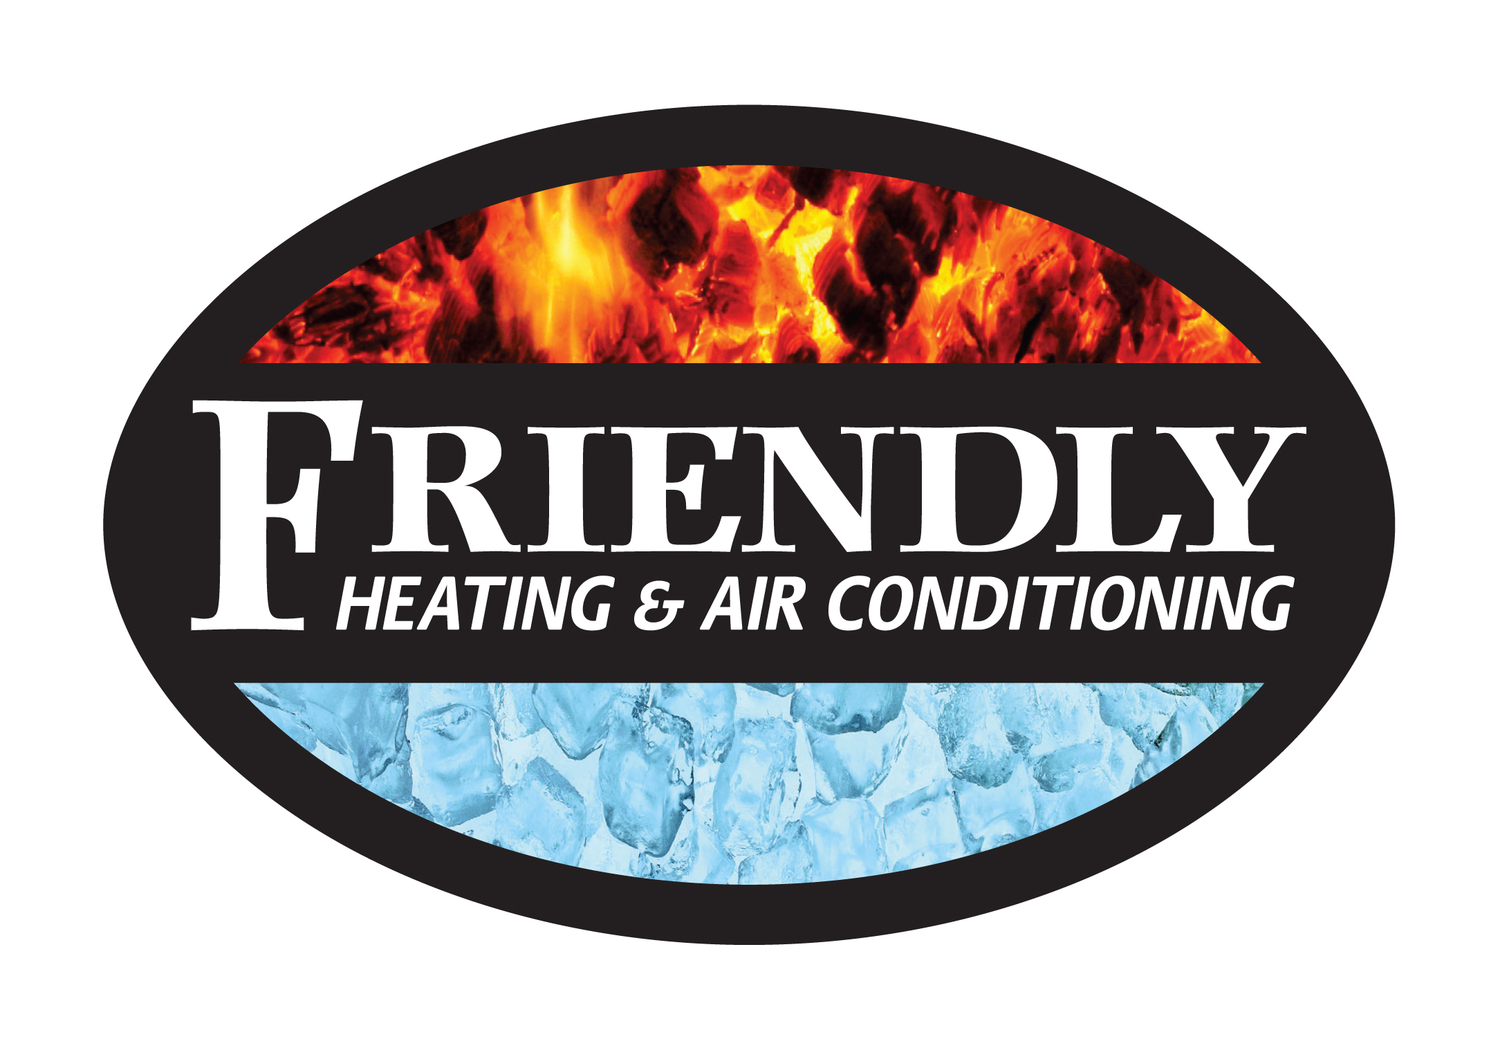 Friendly Heating & Air Conditioning, Inc